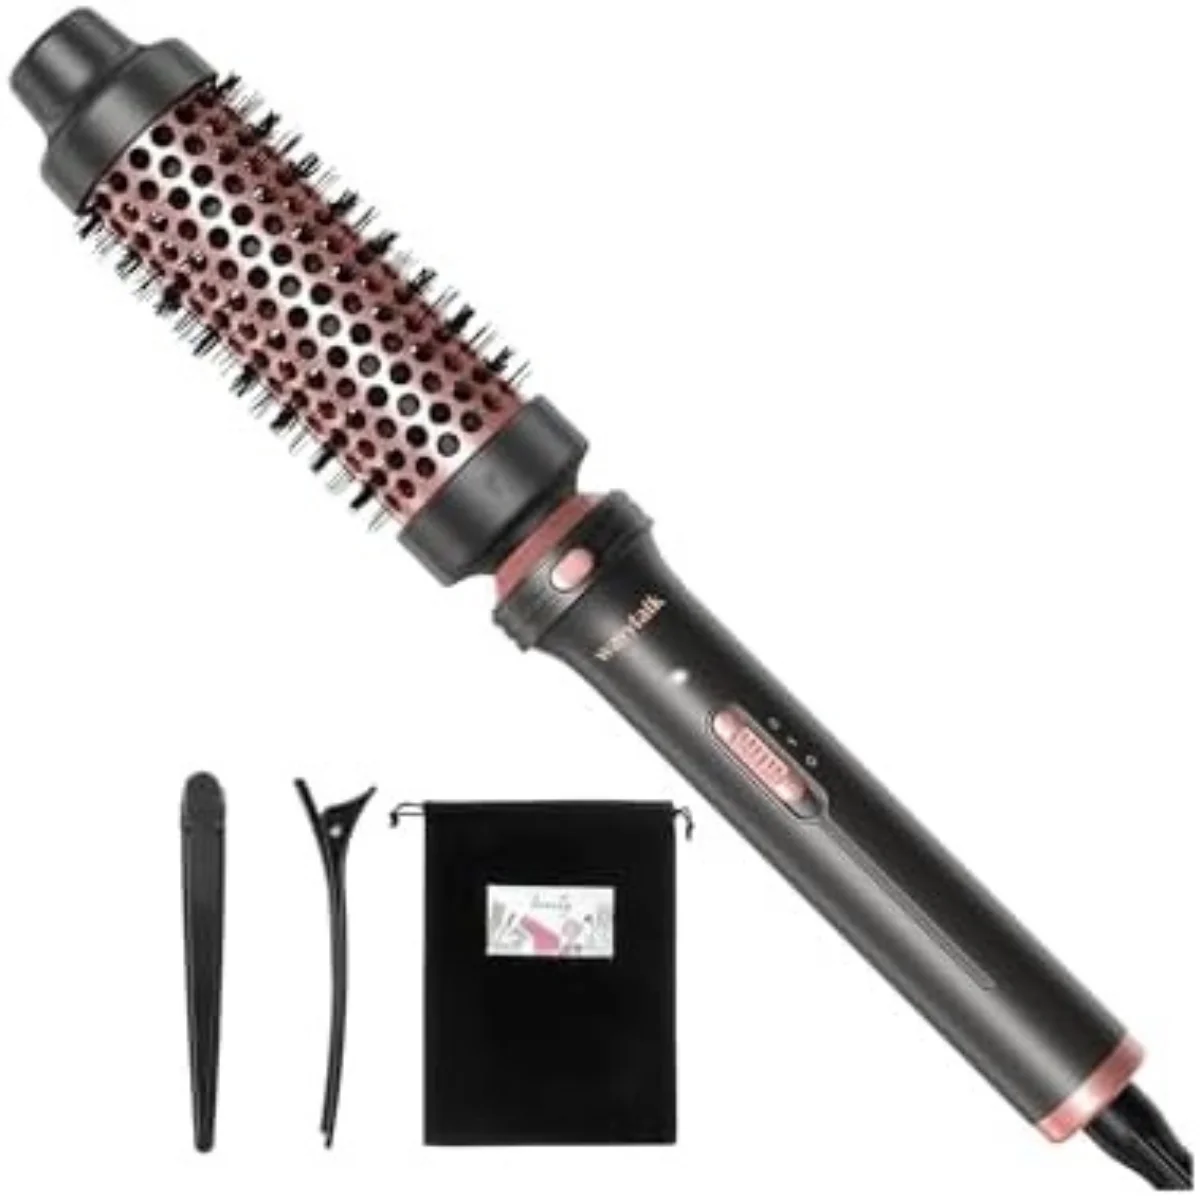 Wavytalk Thermal PTC and 1/2 Travel Heater, Heated Tourmaline Round Detachable Iron Brush, – Brush, with Head for Retail 1 Dual Ceramic with Brush Brush Round Crest Voltage Hot inch Curling